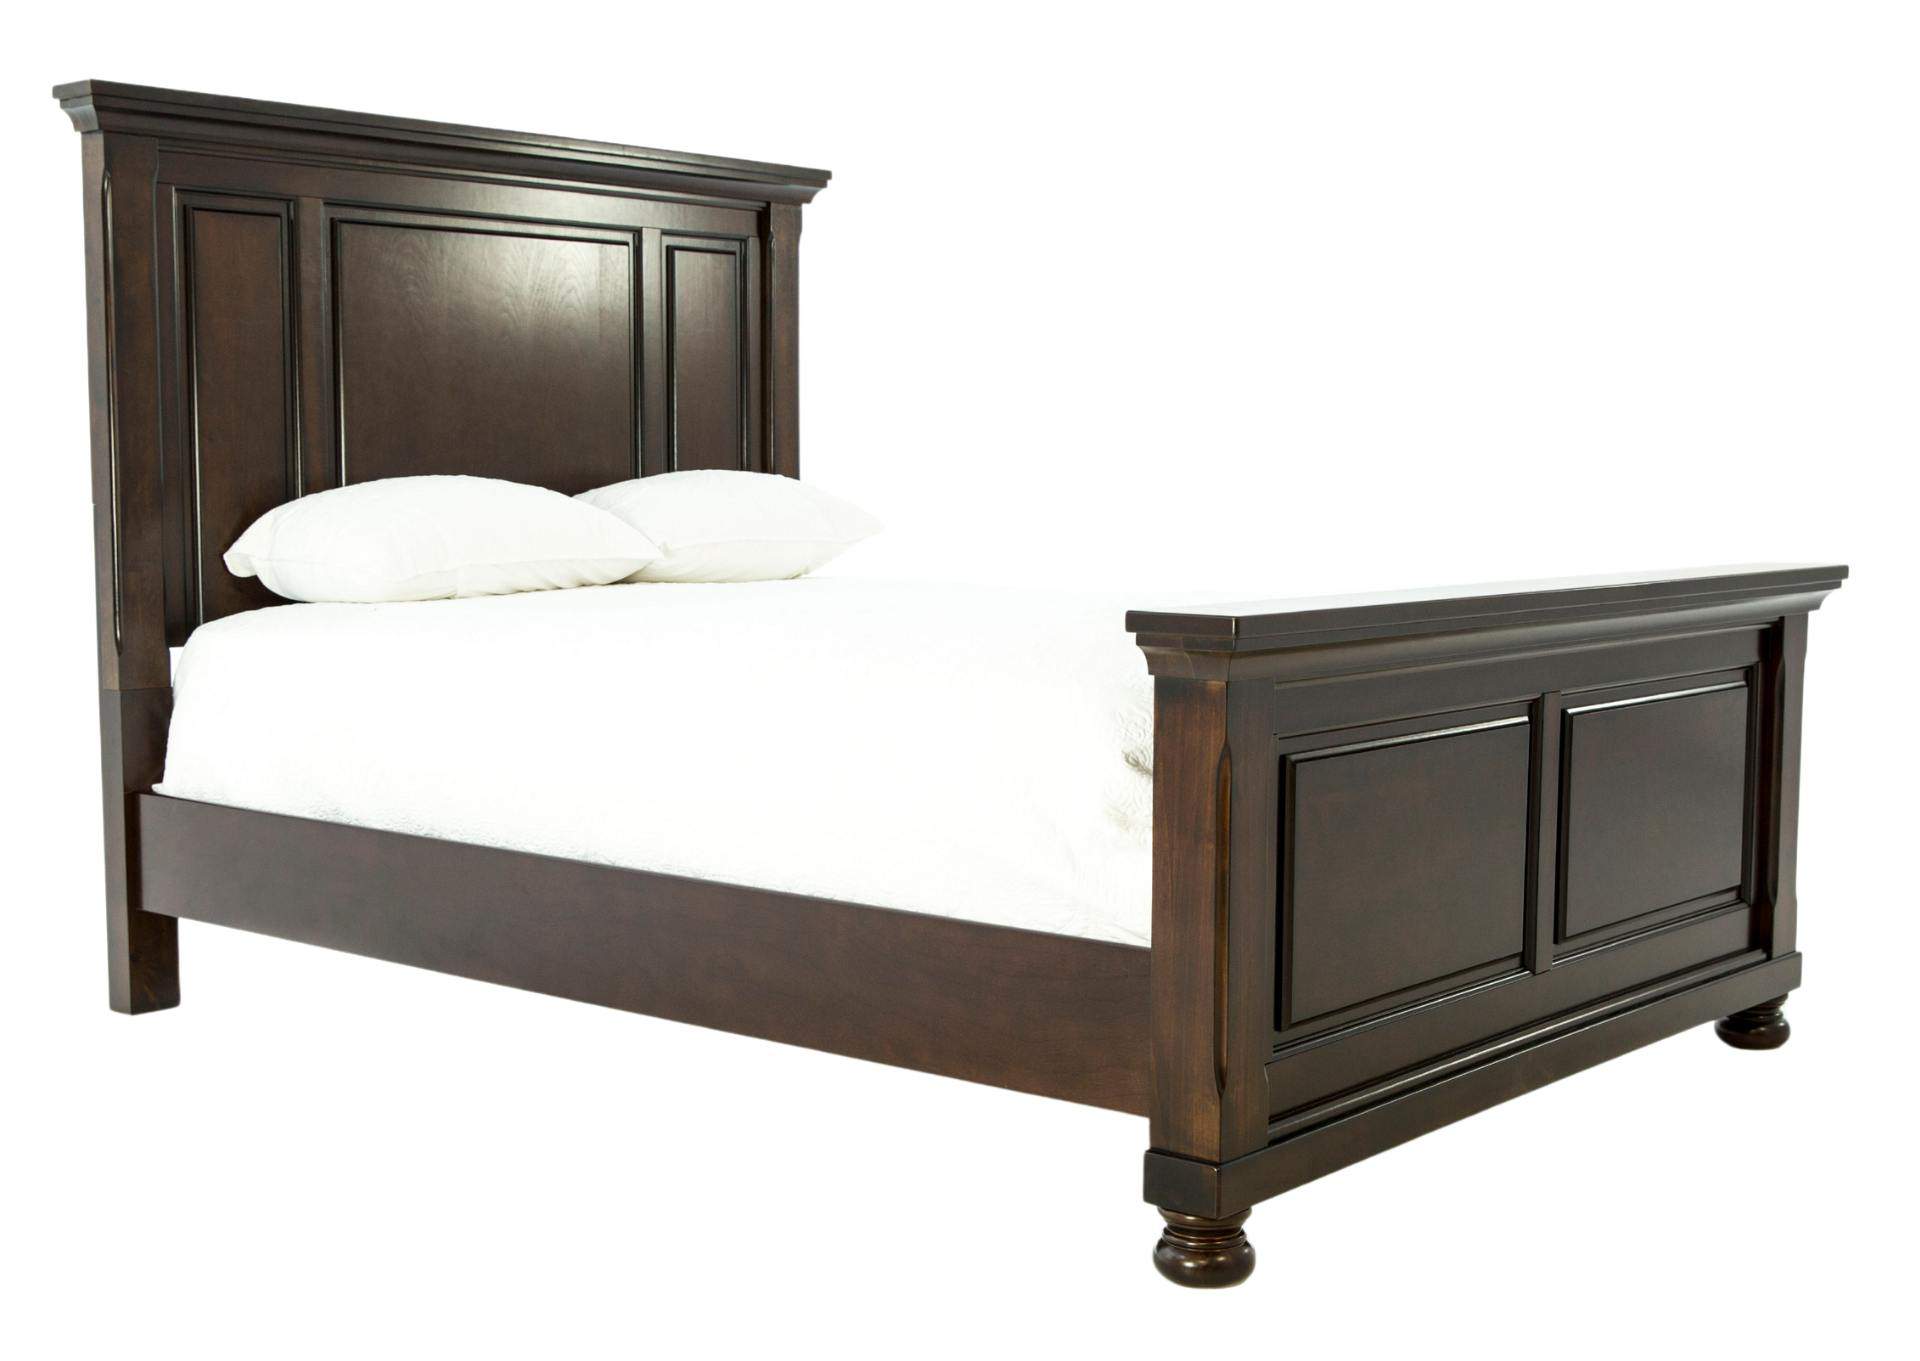 PORTER QUEEN PANEL BED,ASHLEY FURNITURE INC.